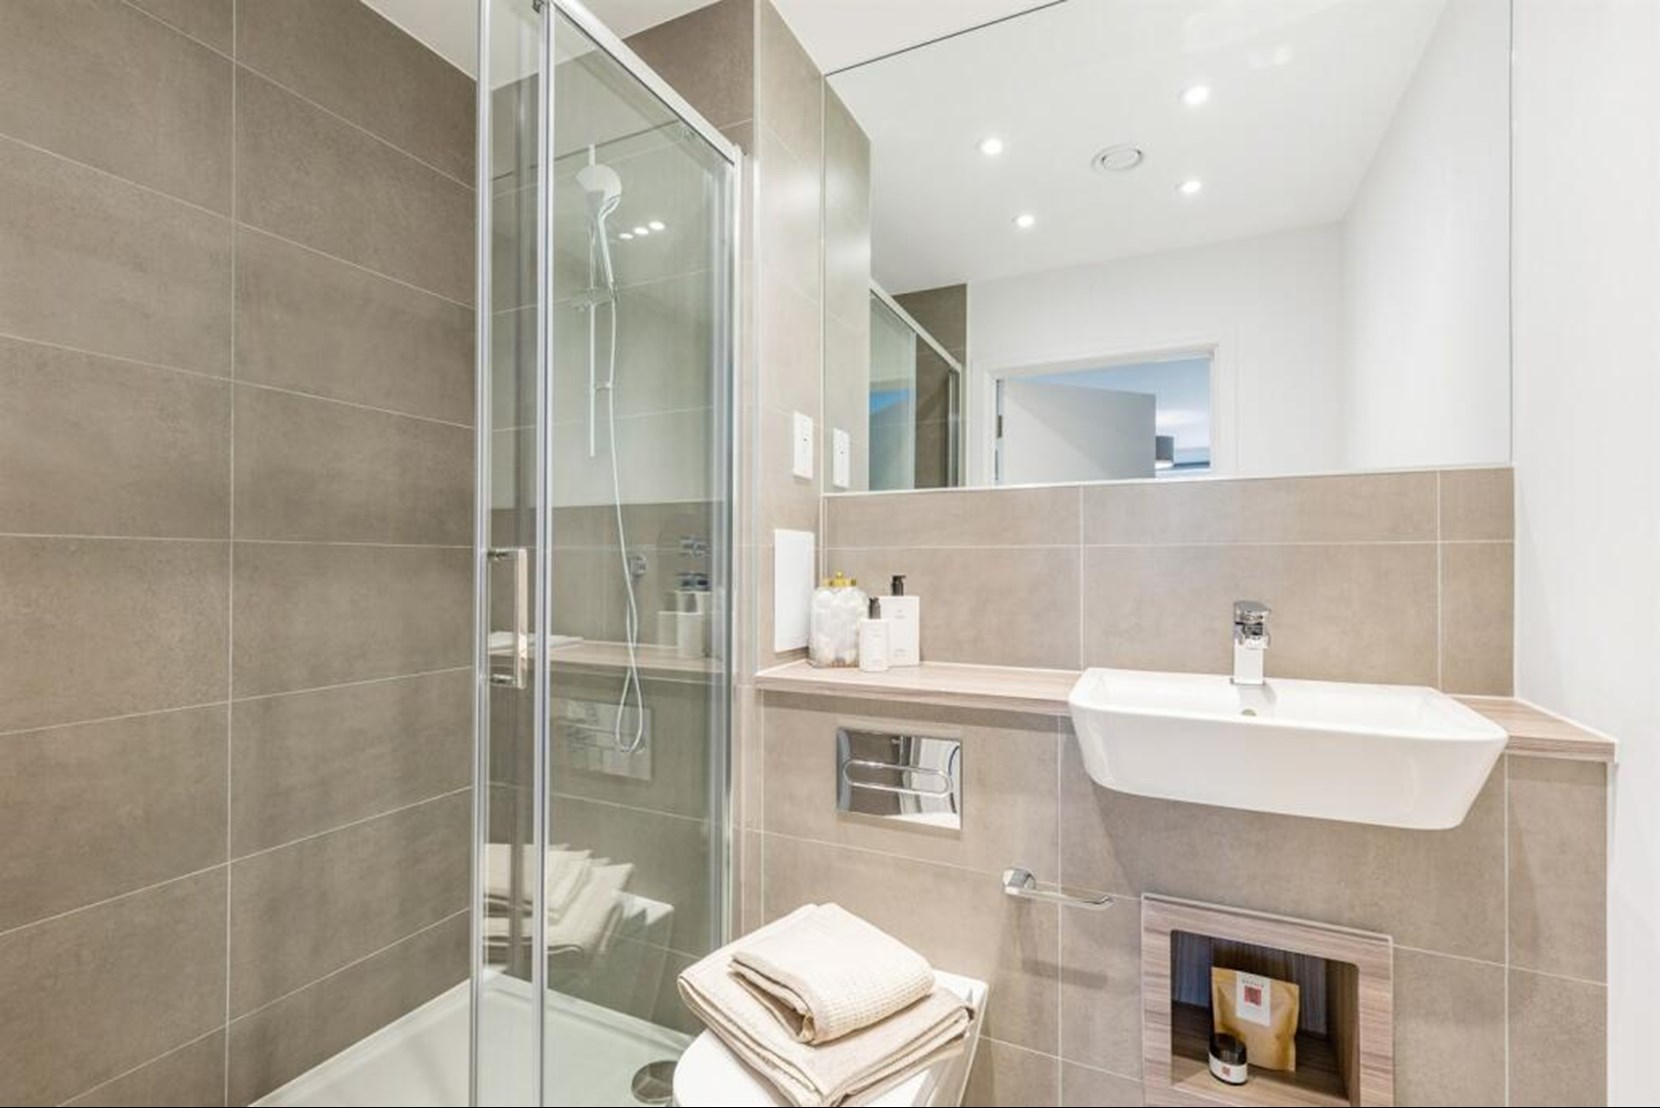 Apartments to Rent by Simple Life London in Ark Soane, Ealing, W3, The Beryl bathroom